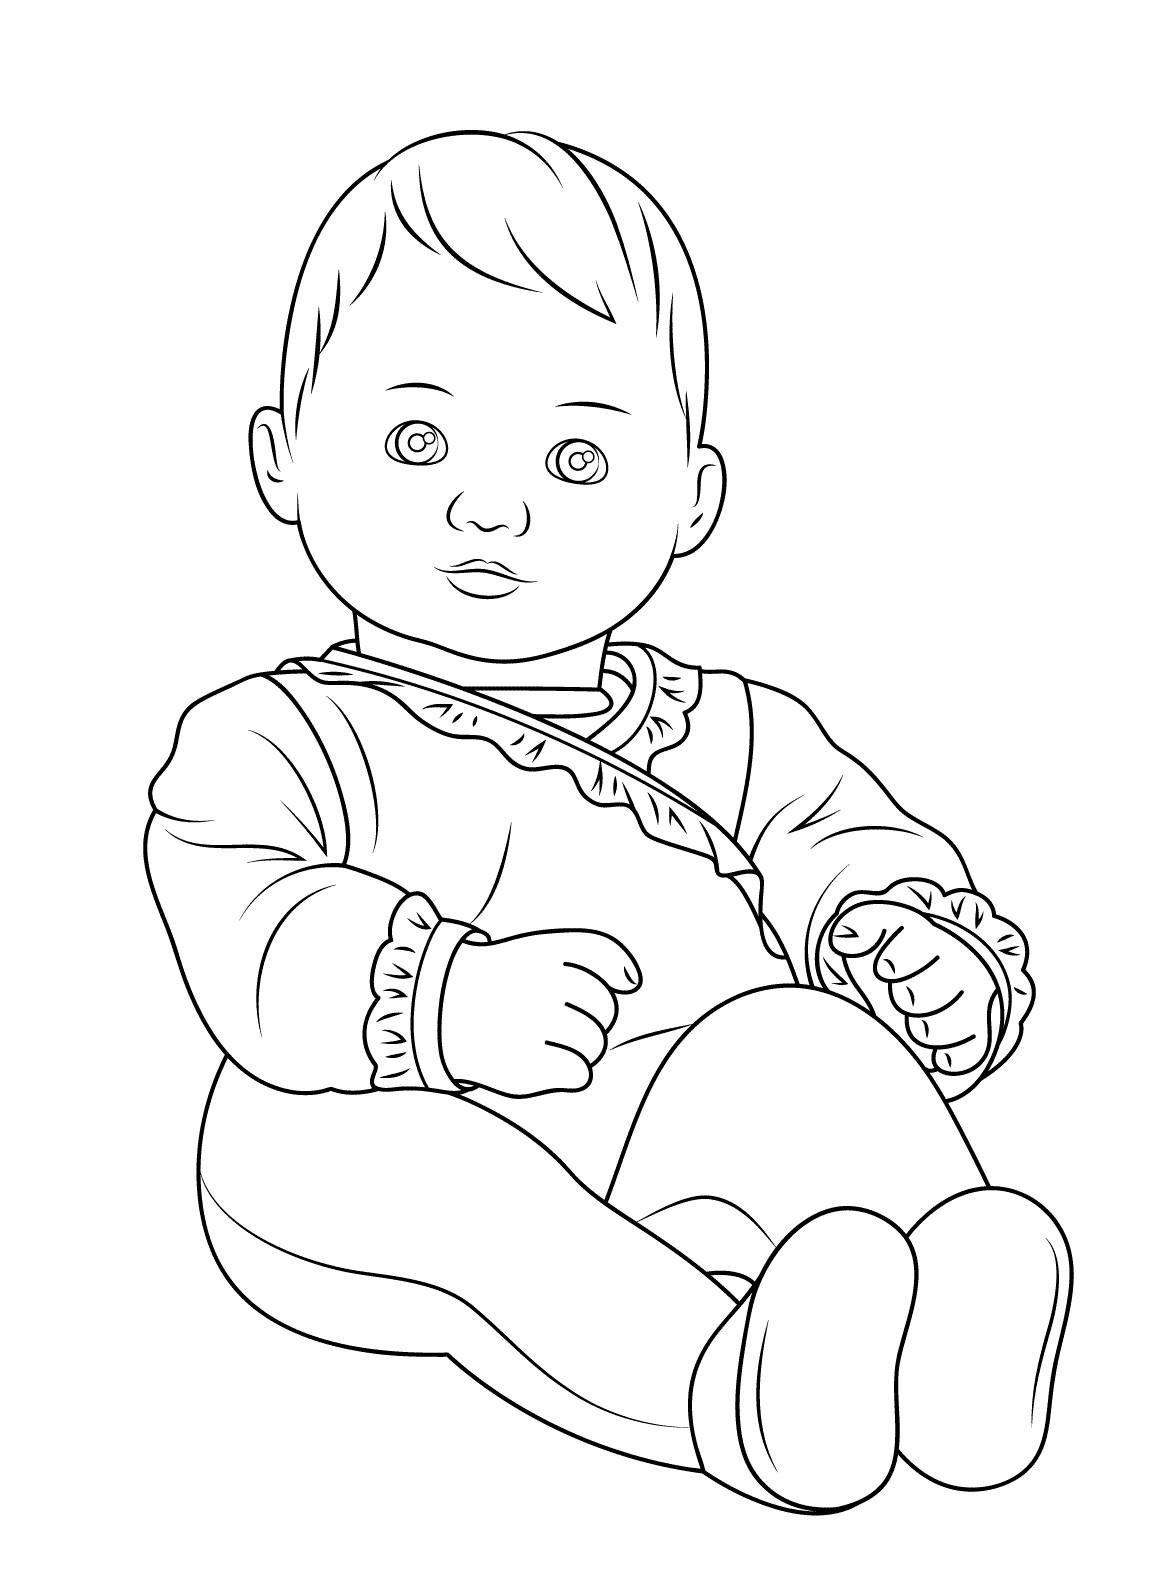 American Girls Coloring Pages
 American Girl Coloring Pages Best Coloring Pages For Kids